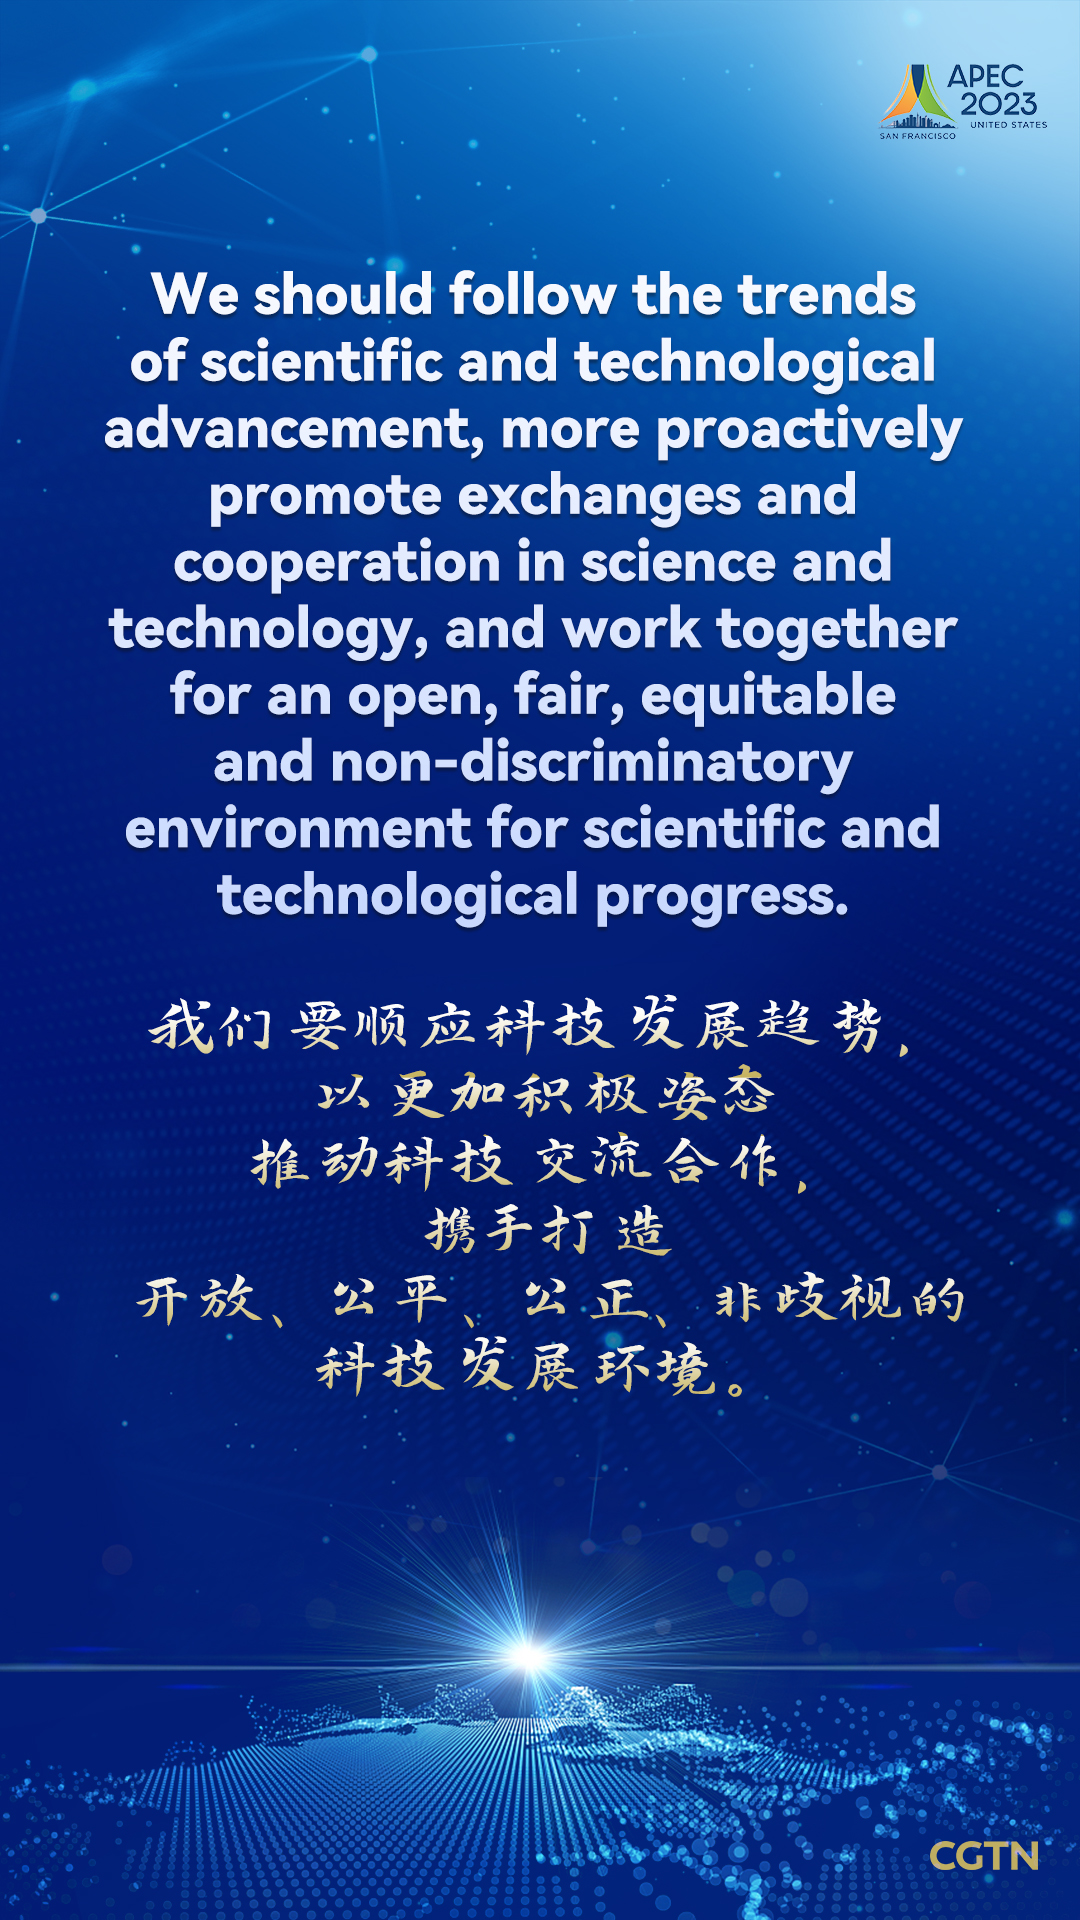 Key quotes from Xi Jinping's speech at 30th APEC Economic Leaders' Meeting